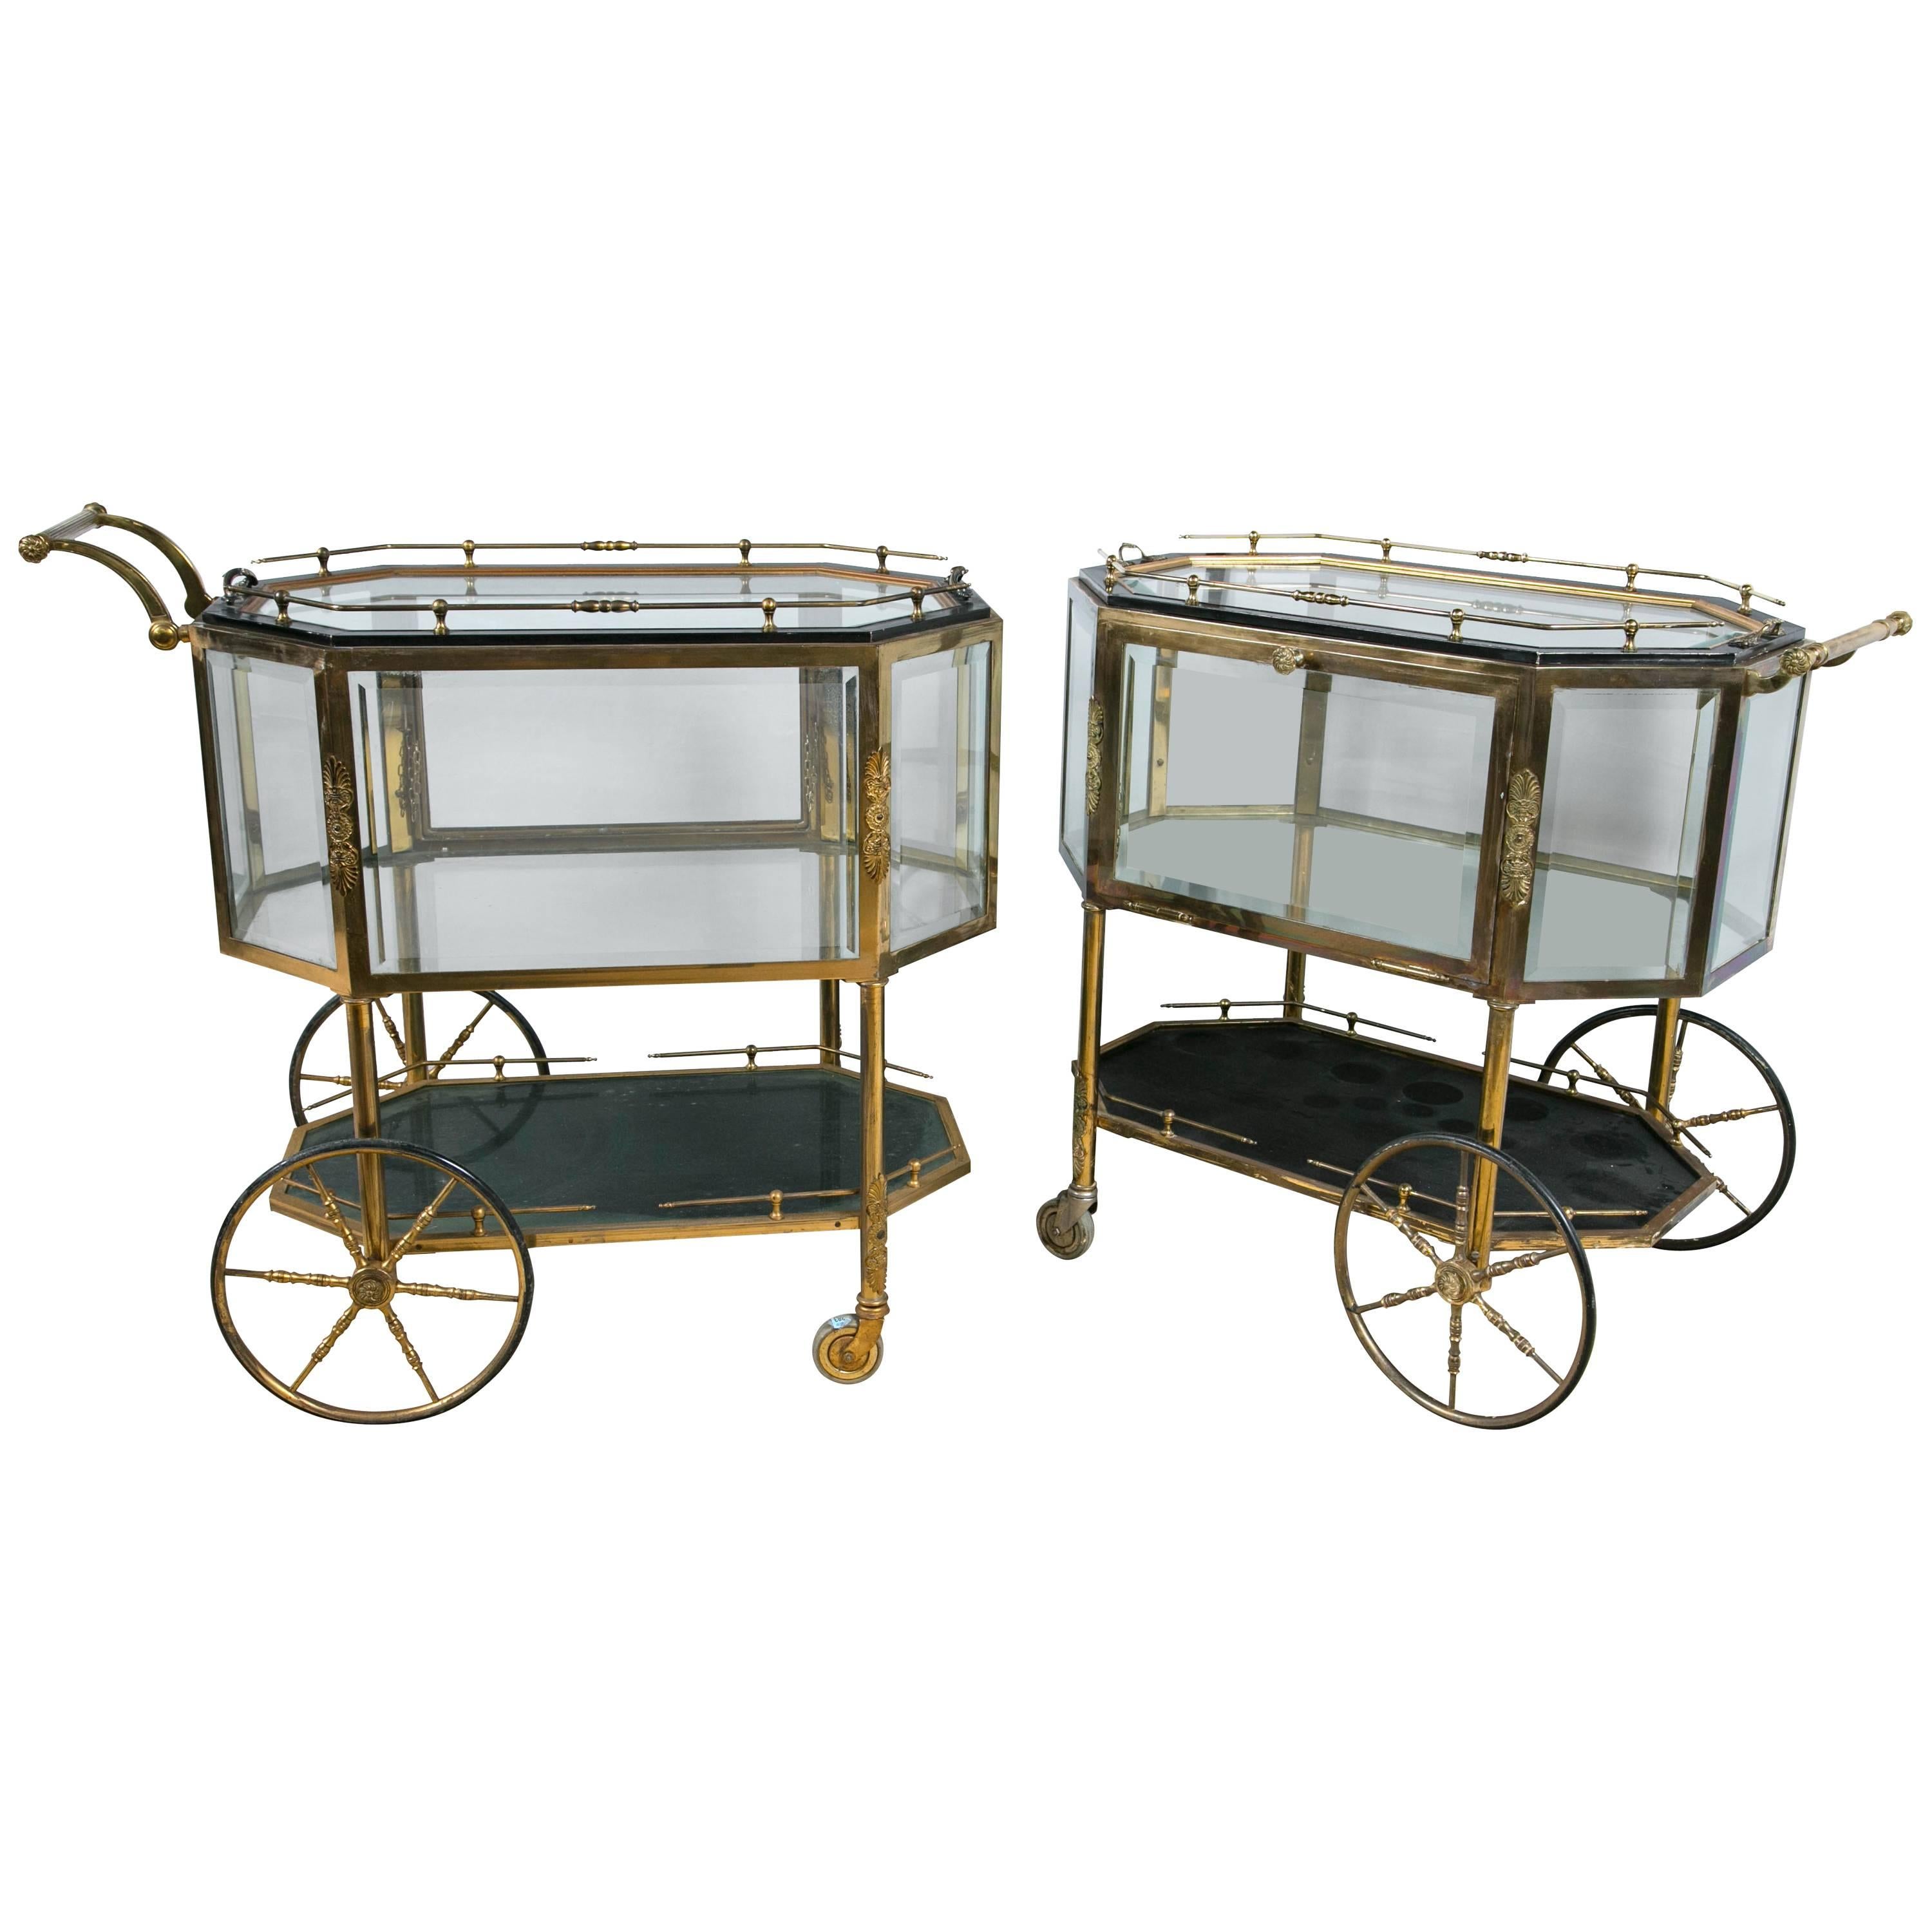 Pair of Bronze Tray Top Showcase Serving Carts